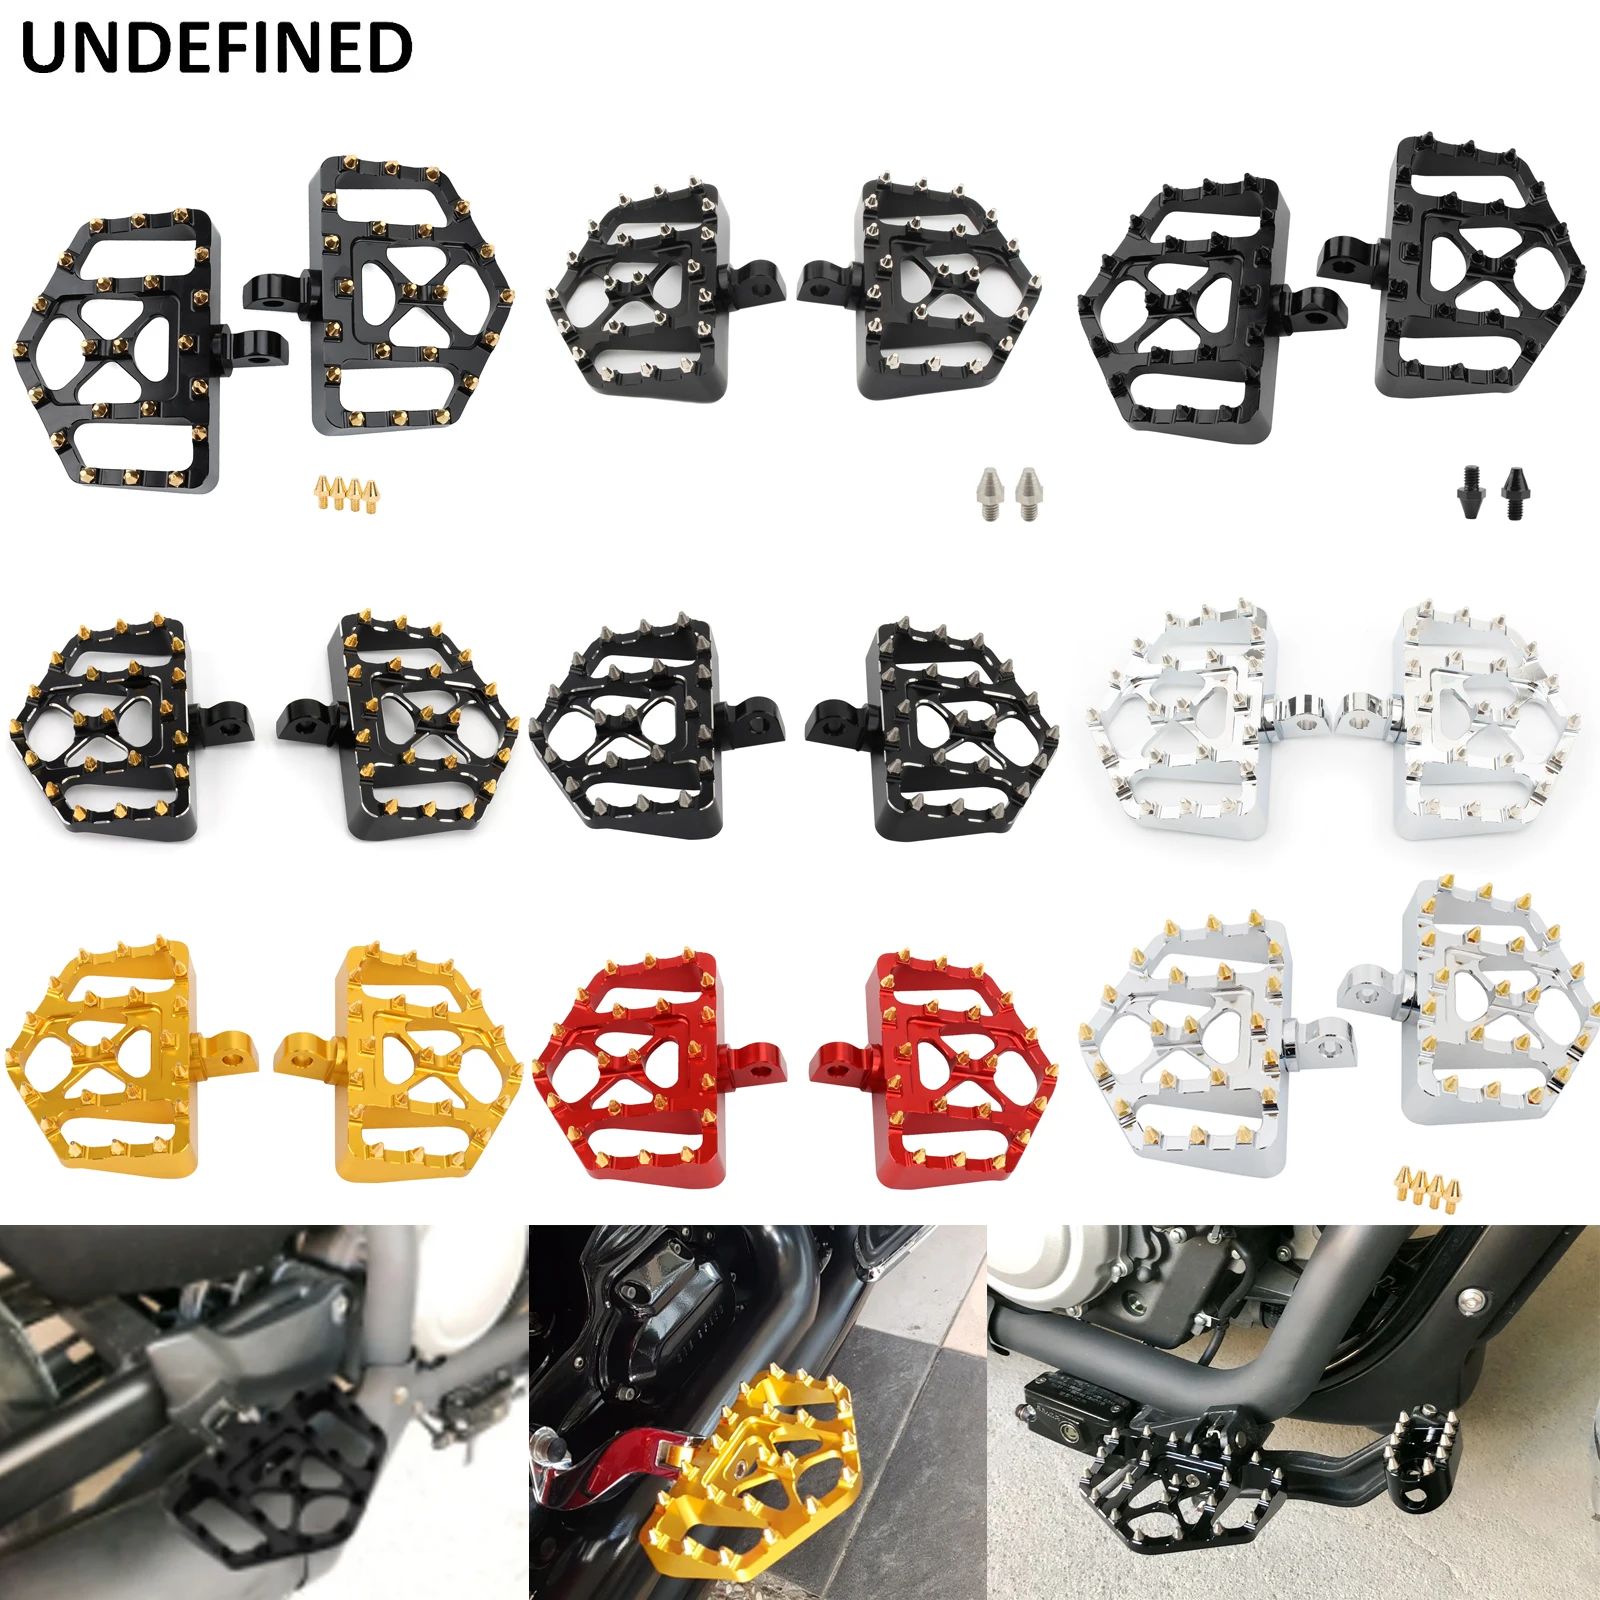 MX Foot Pegs Motorcycle Wide Fat Floorboards Chopper Footrests For Harley Dyna Sportster 883 1200 Softail Fatboy Street Bob Slim